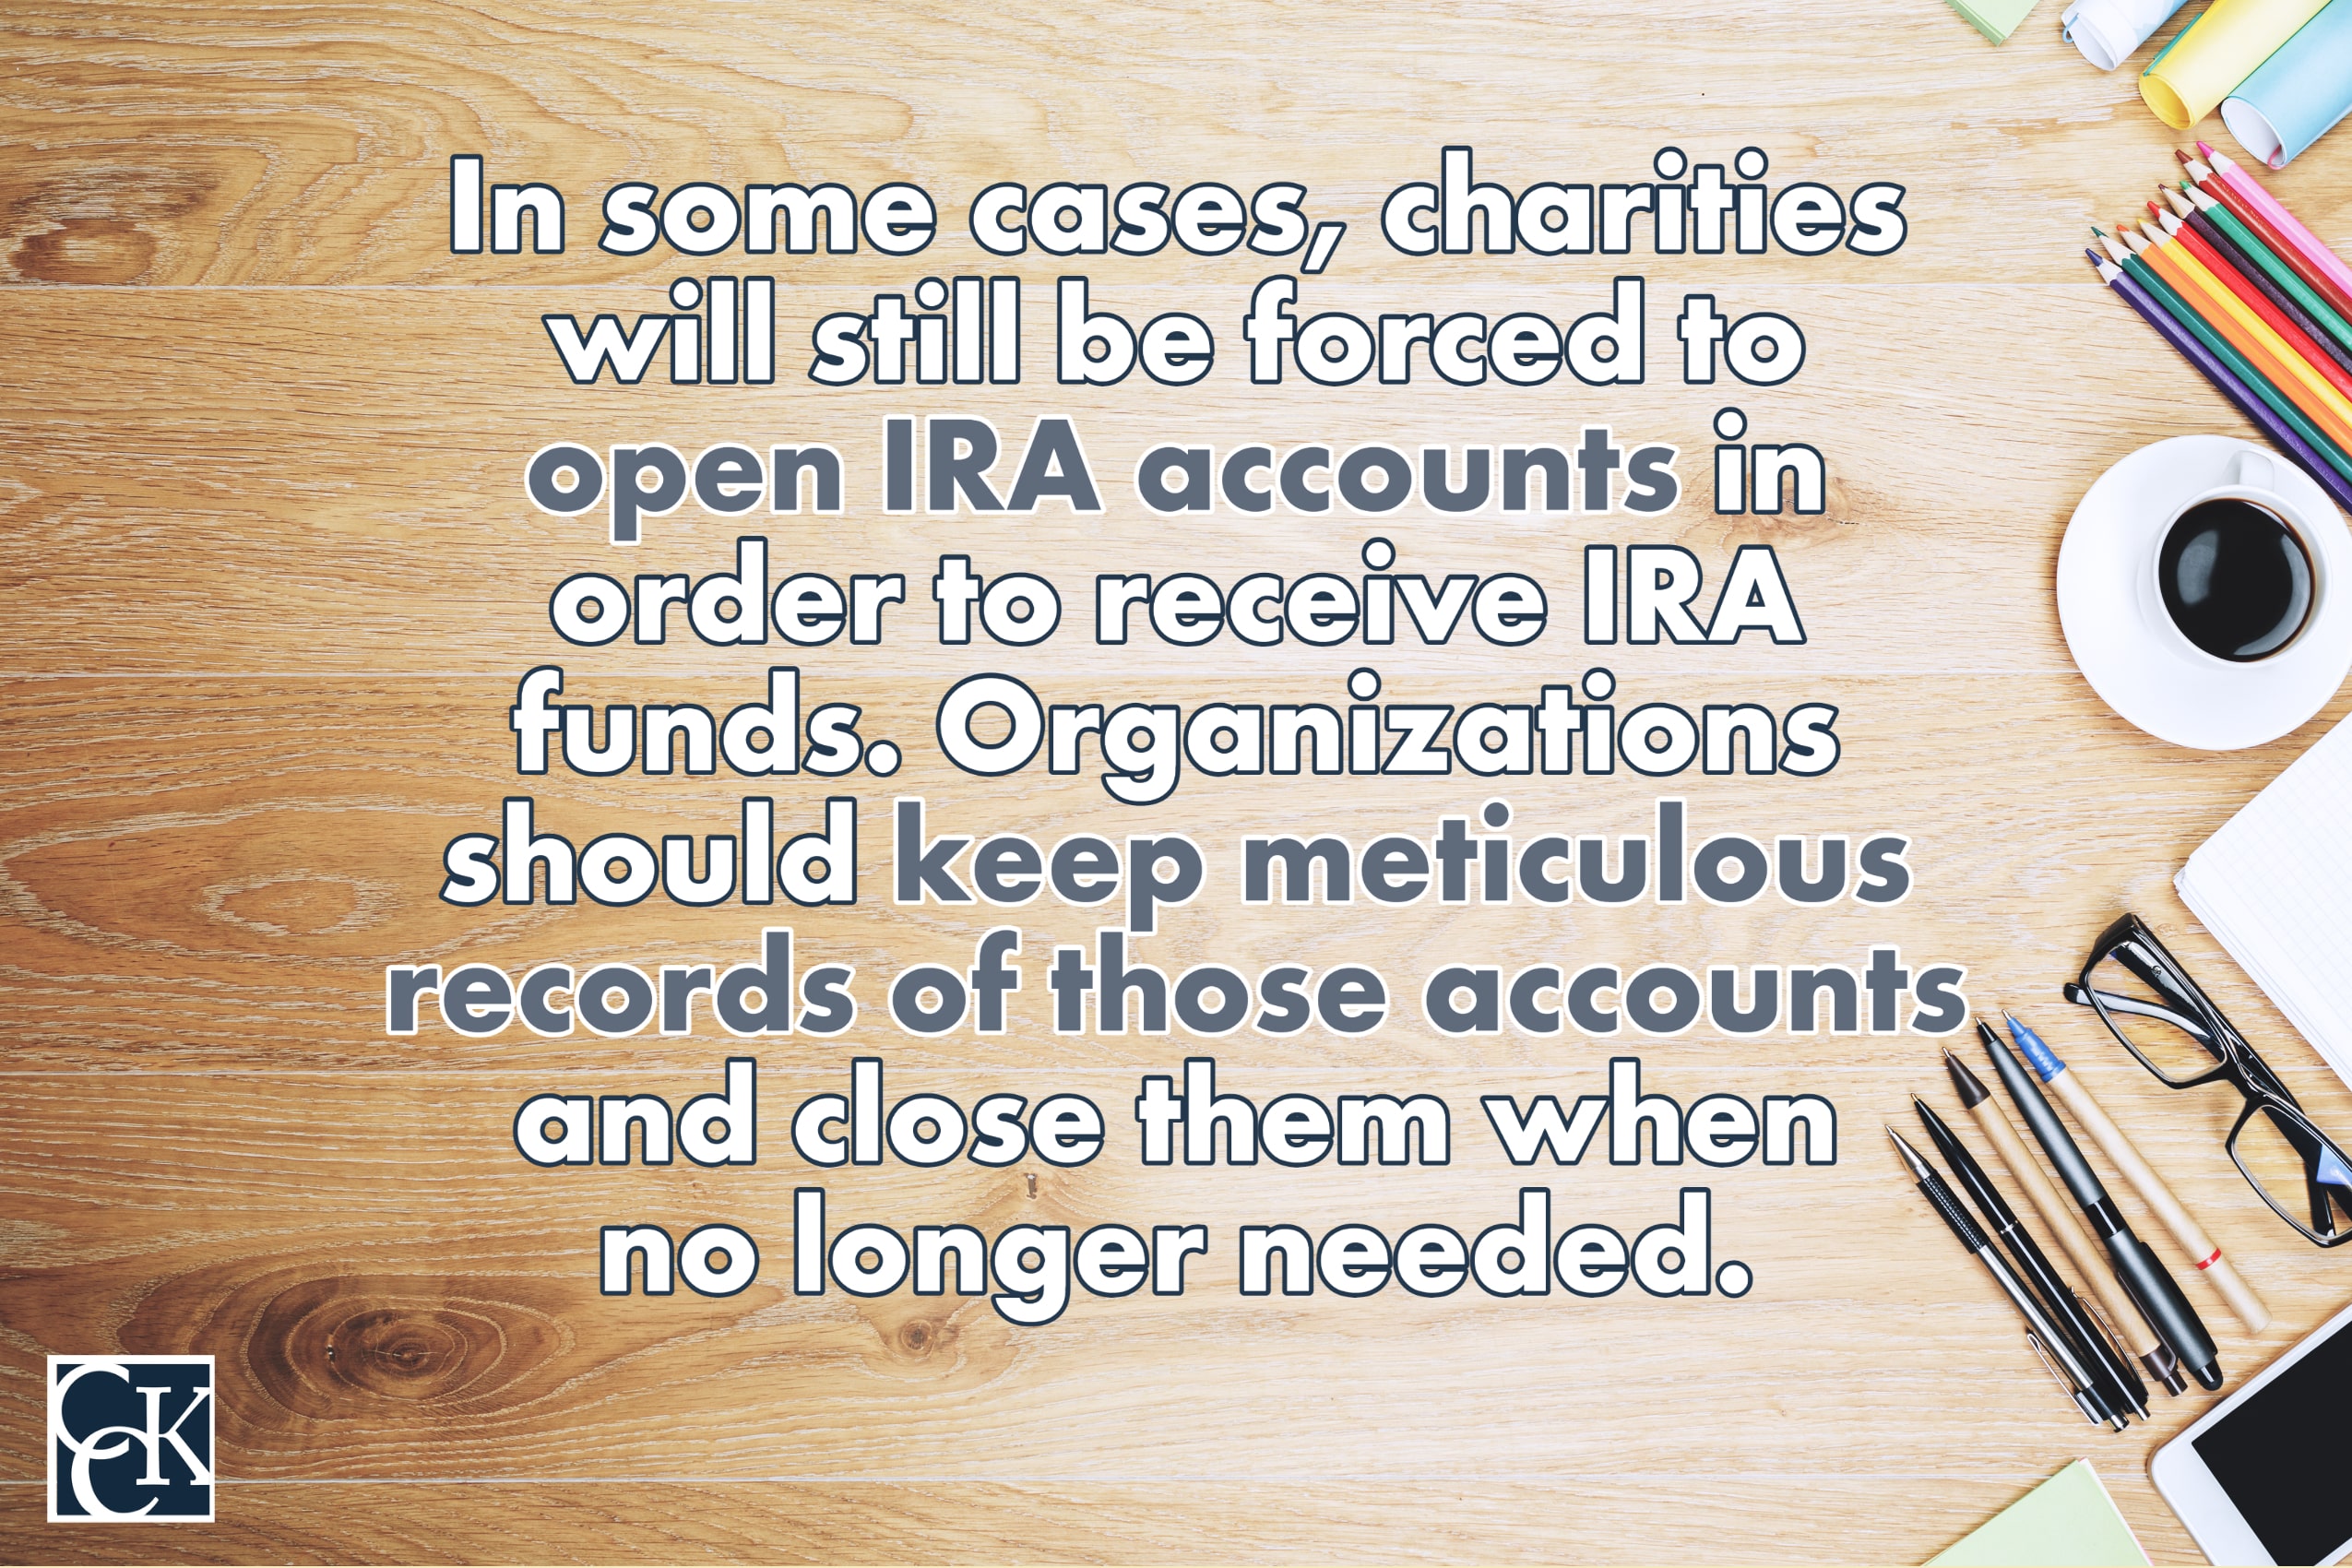 In some cases, charities will still be forced to open IRA accounts in order to receive IRA funds. Organizations should keep meticulous records of those accounts and close them when no longer needed. 